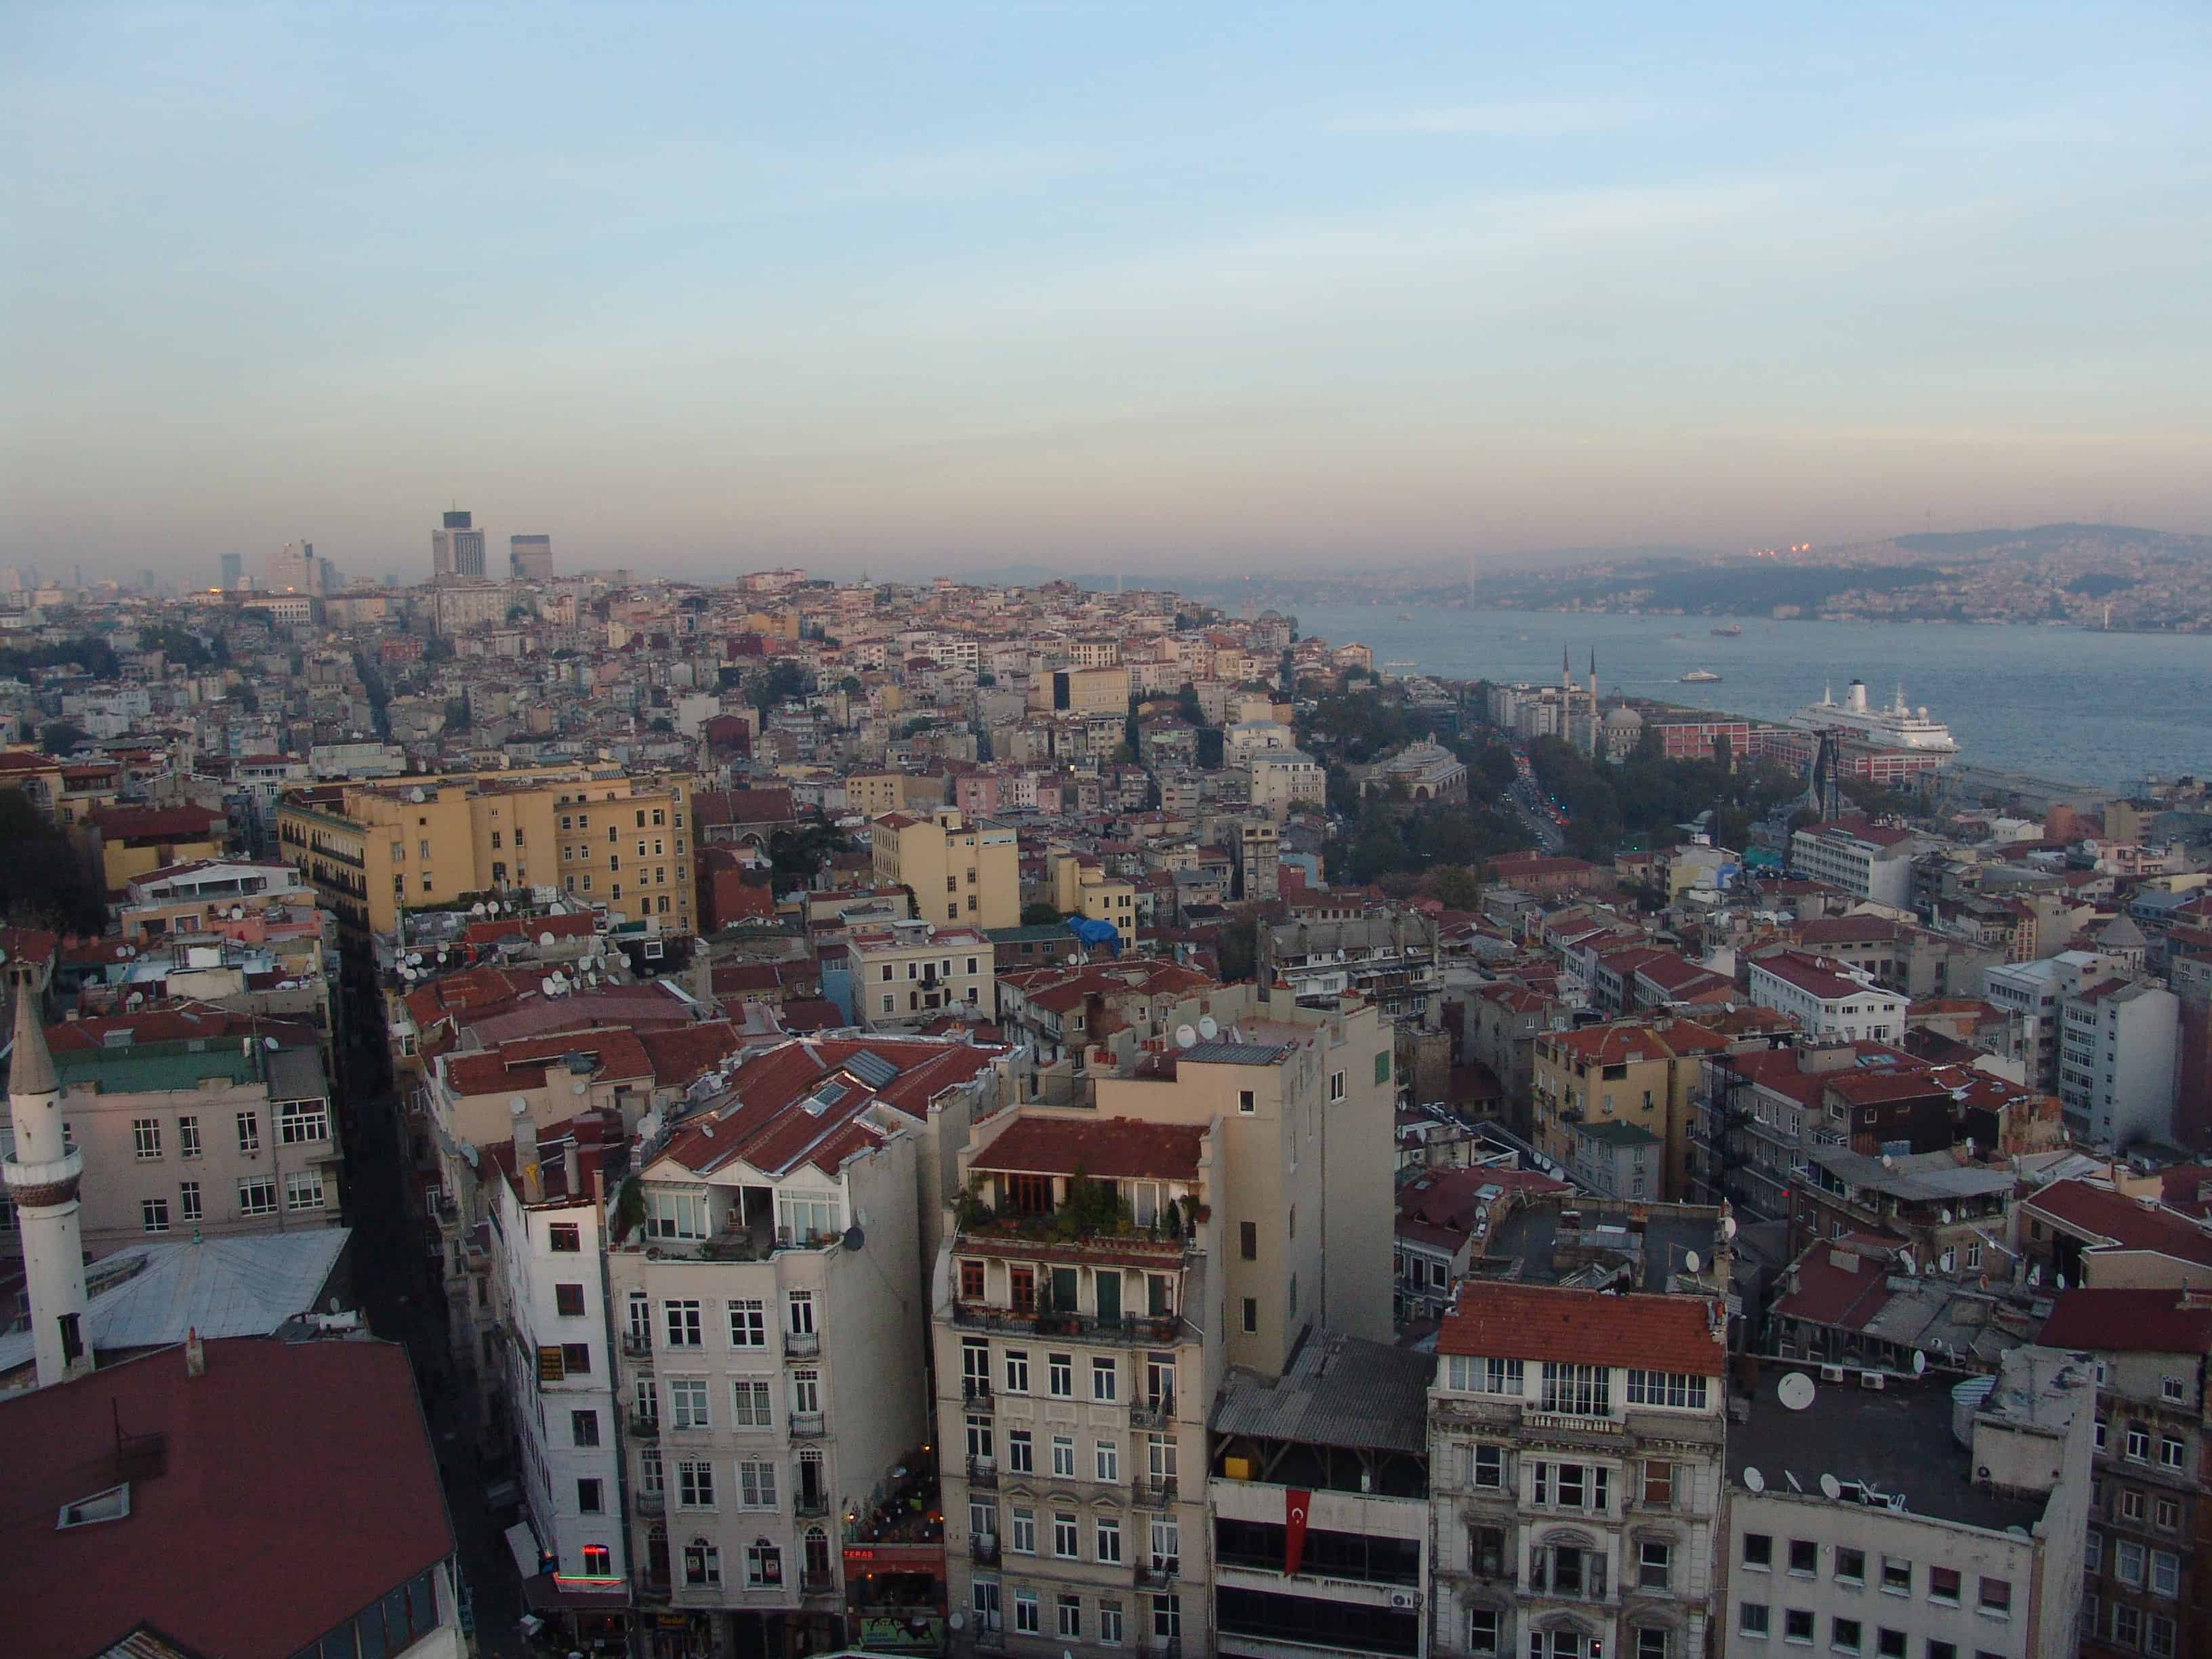 Looking north towards Taksim and the Bosporus from the top of the Galata Tower in Beyoğlu, Istanbul, Turkey